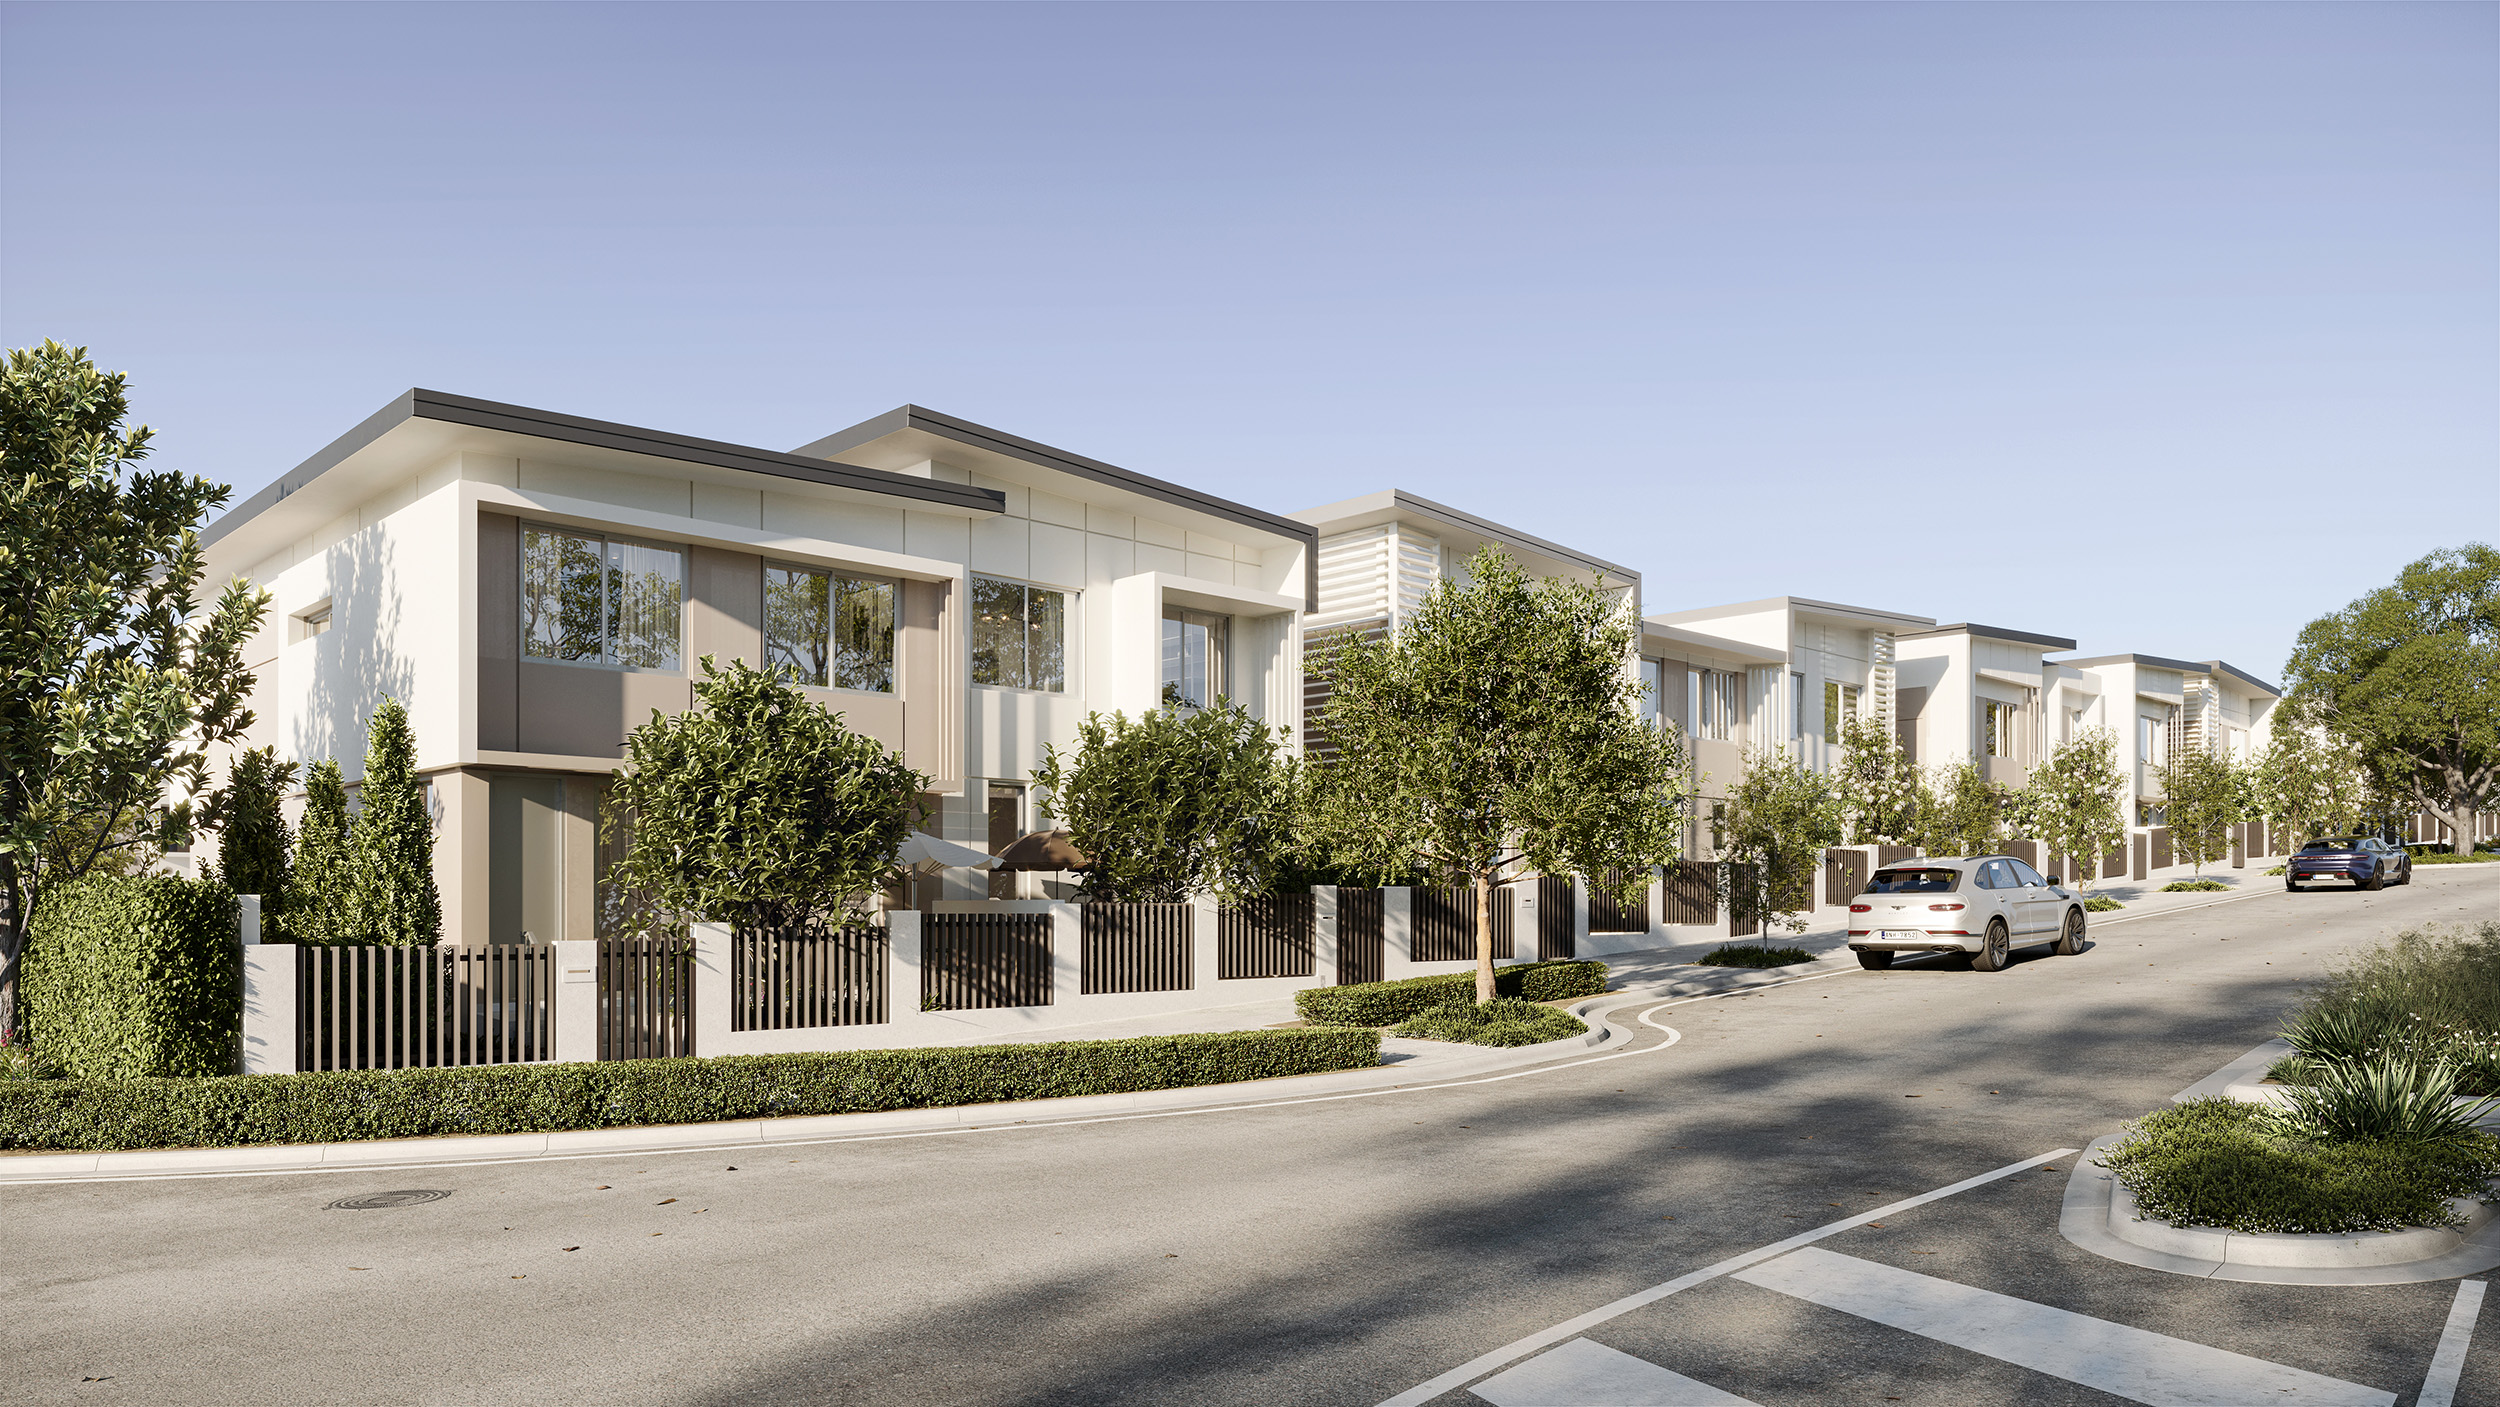 Street view of beautifully designed Armida Residences townhouses with light color palette and privacy fences covered in greenery and battening